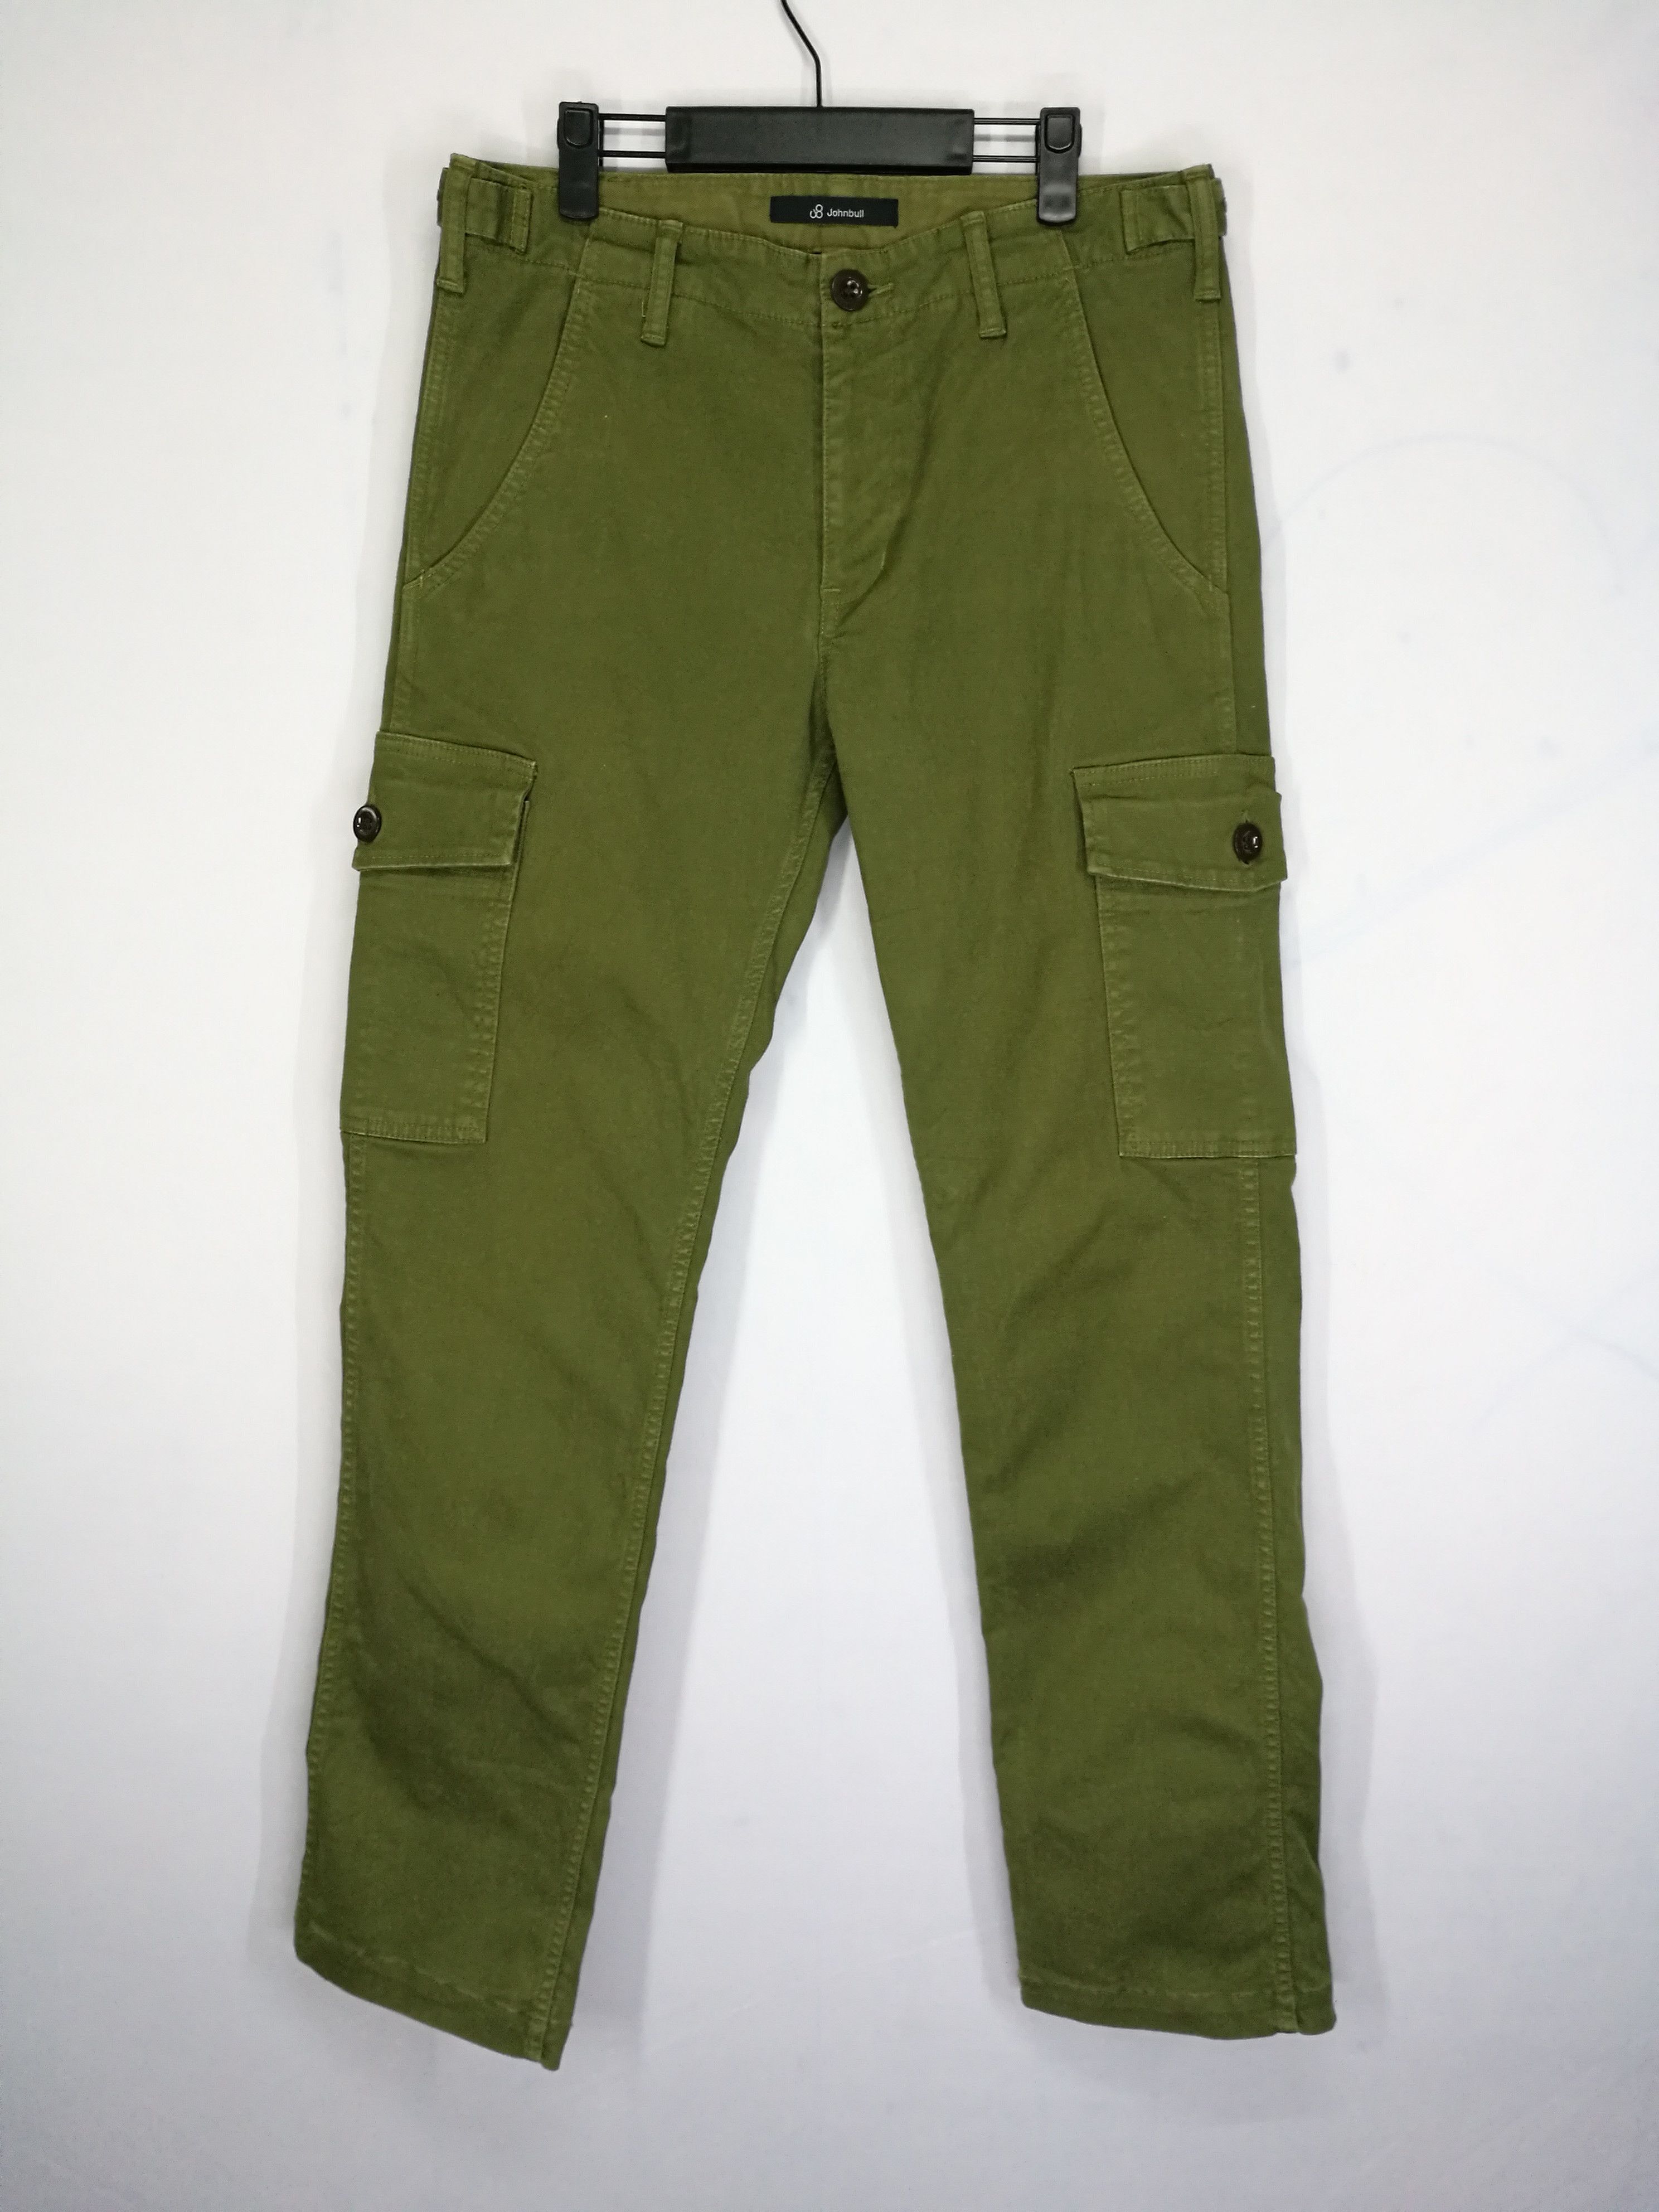 Military JOHNBULL Cargo Pants Military Multipocket Tactical Pants | Grailed